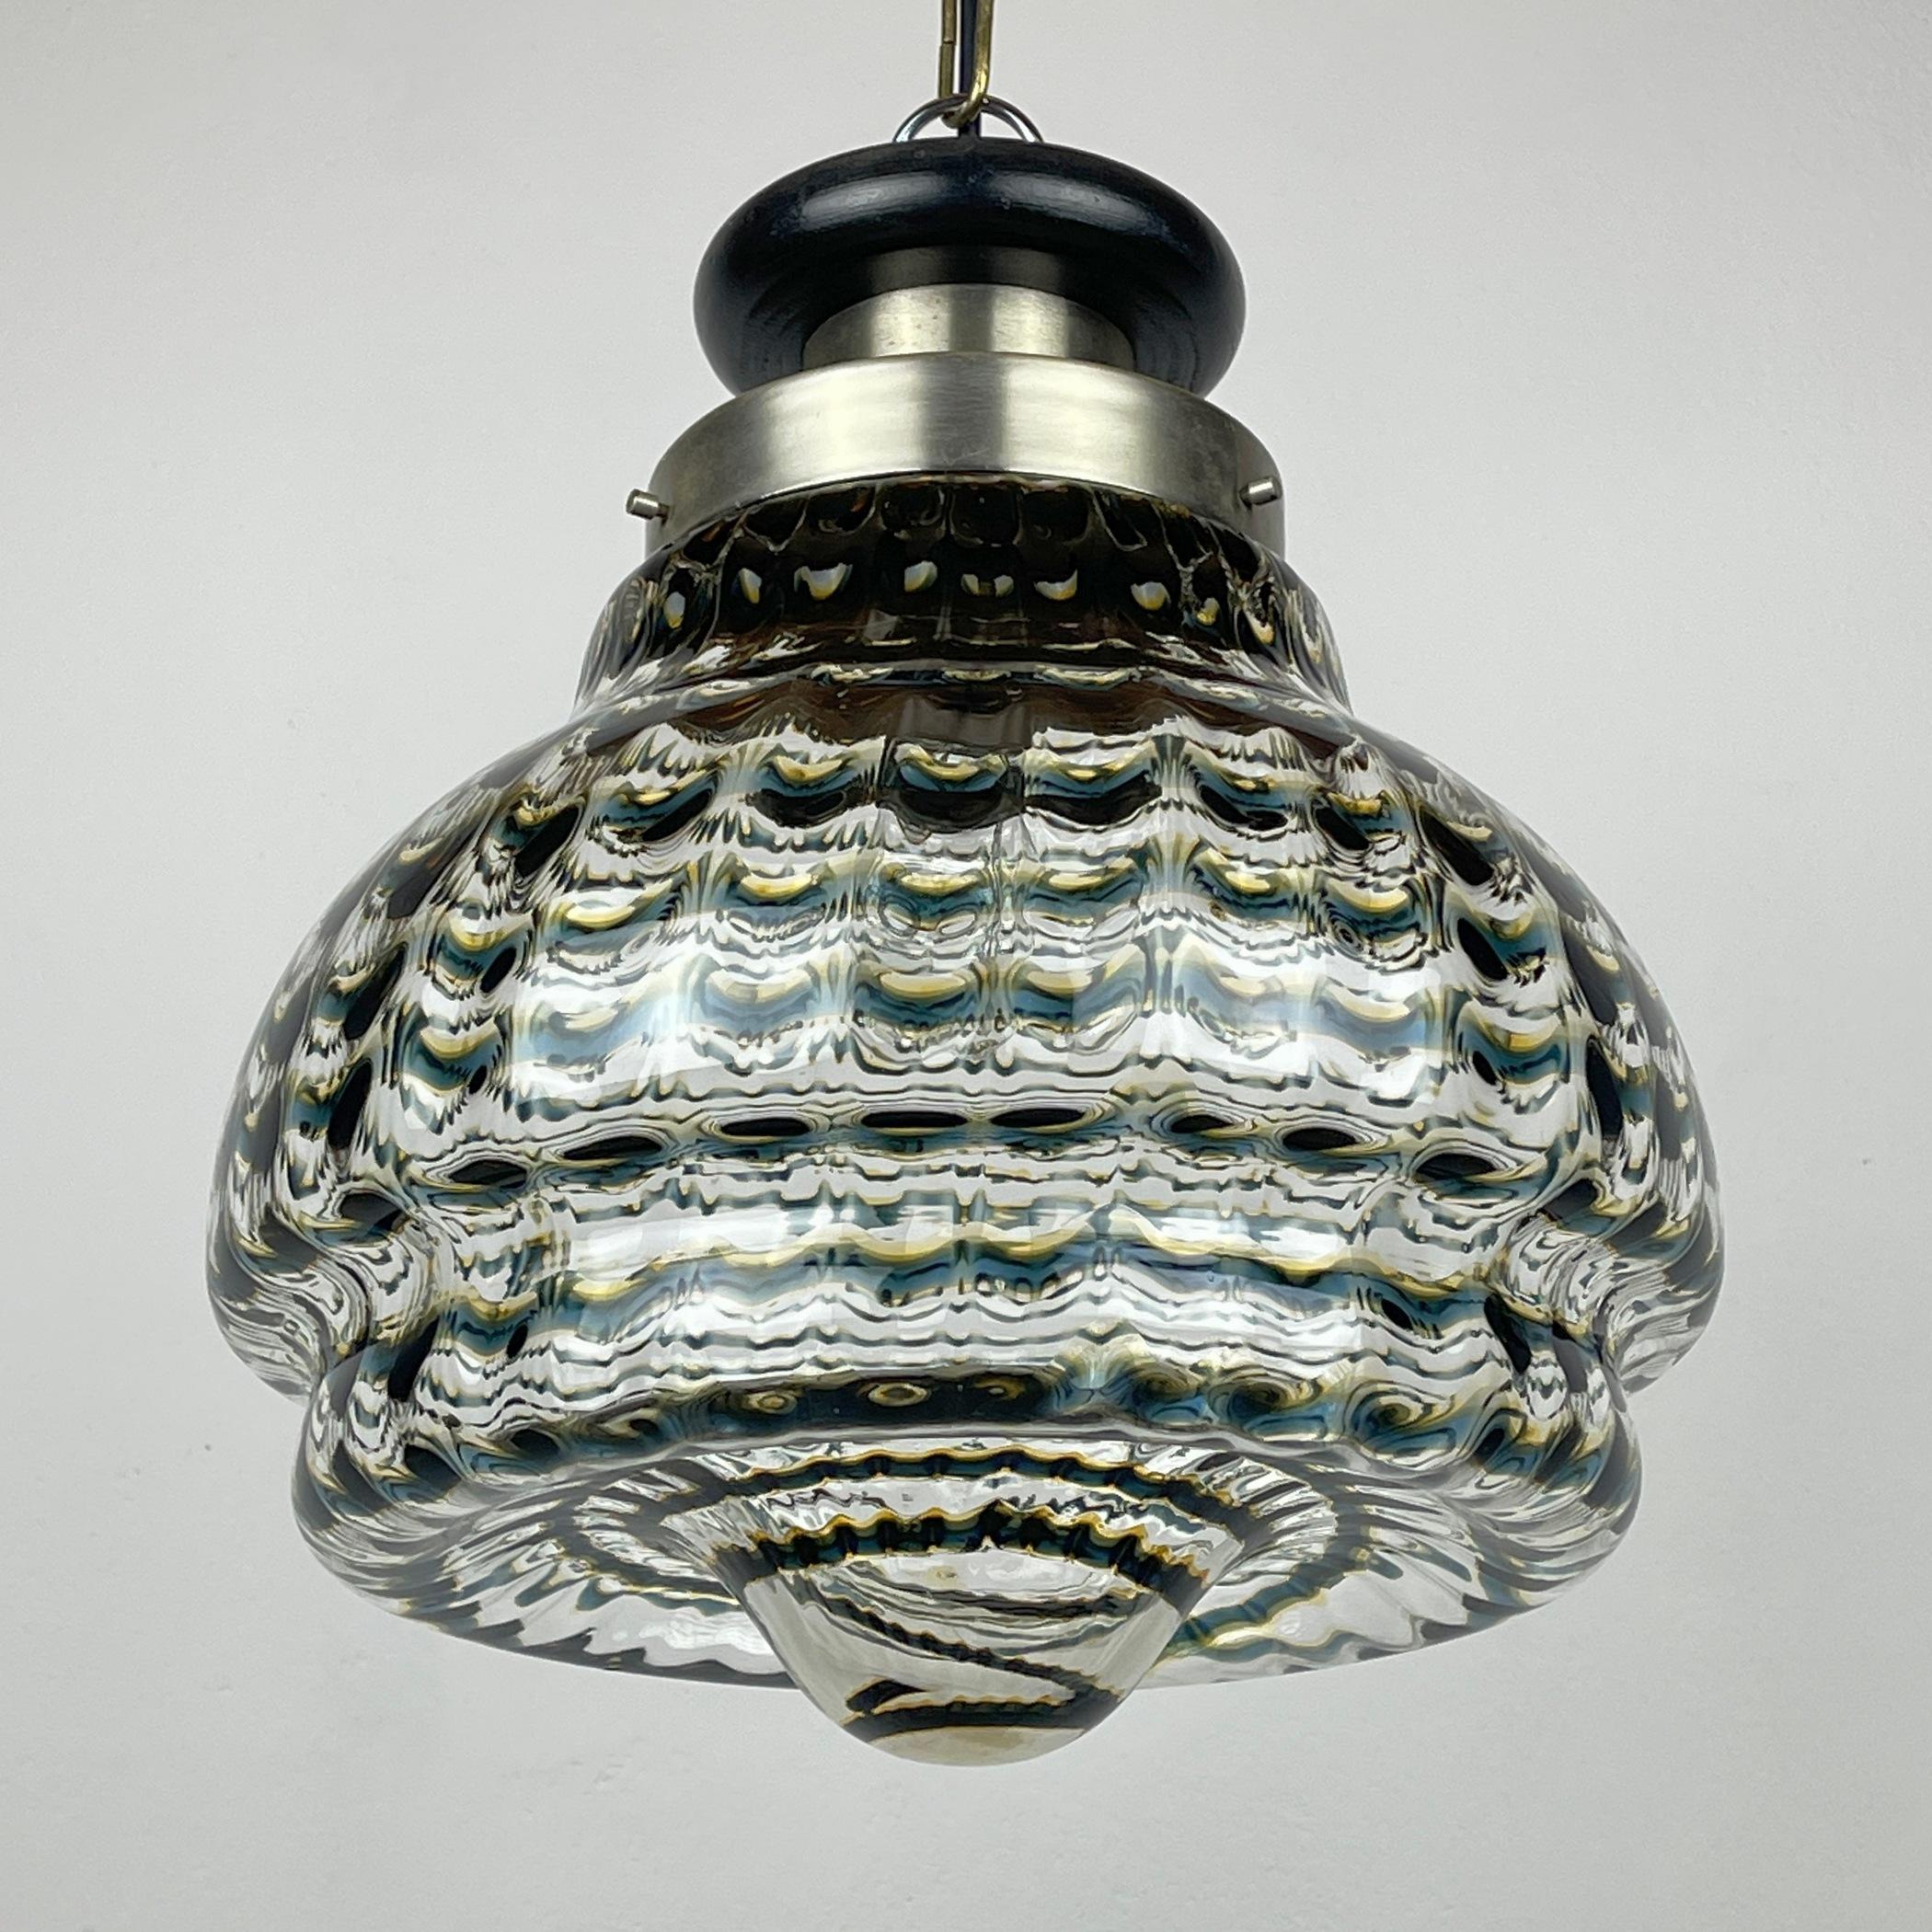 Presenting the exquisite hand-blown Murano glass pendant lamp, a rare gem hailing from Italy in the 1960s. This extraordinary chandelier is a prized find in the vintage market, showcasing the unparalleled beauty and craftsmanship of Murano